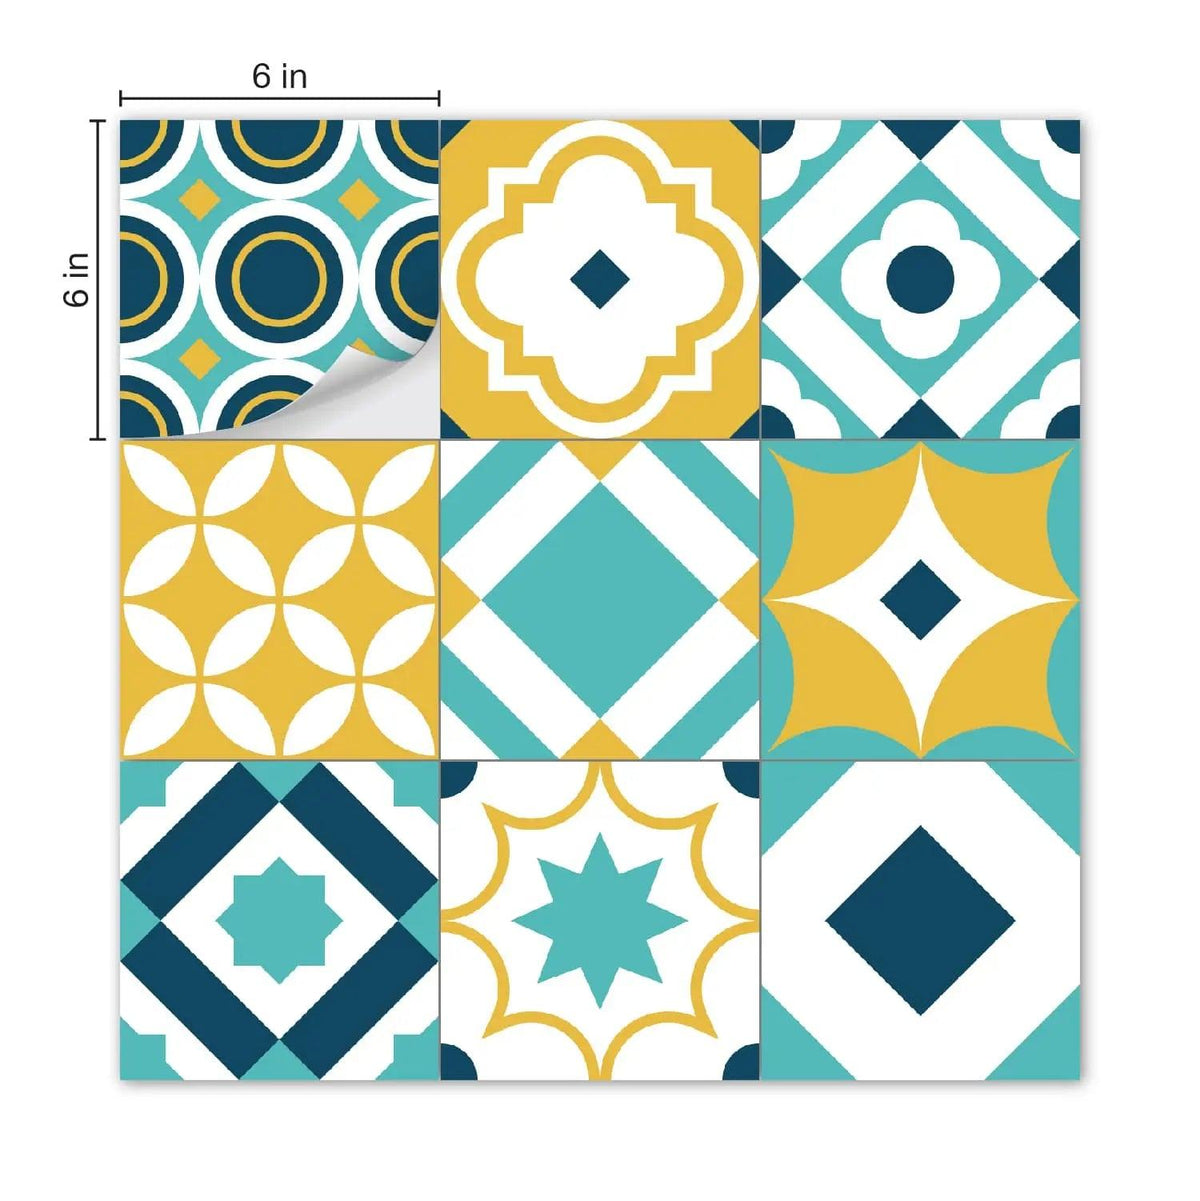 Tile Stickers Turkish Tile Stickers - Mosaicowall Mosaicowall Turkish Tile Stickers